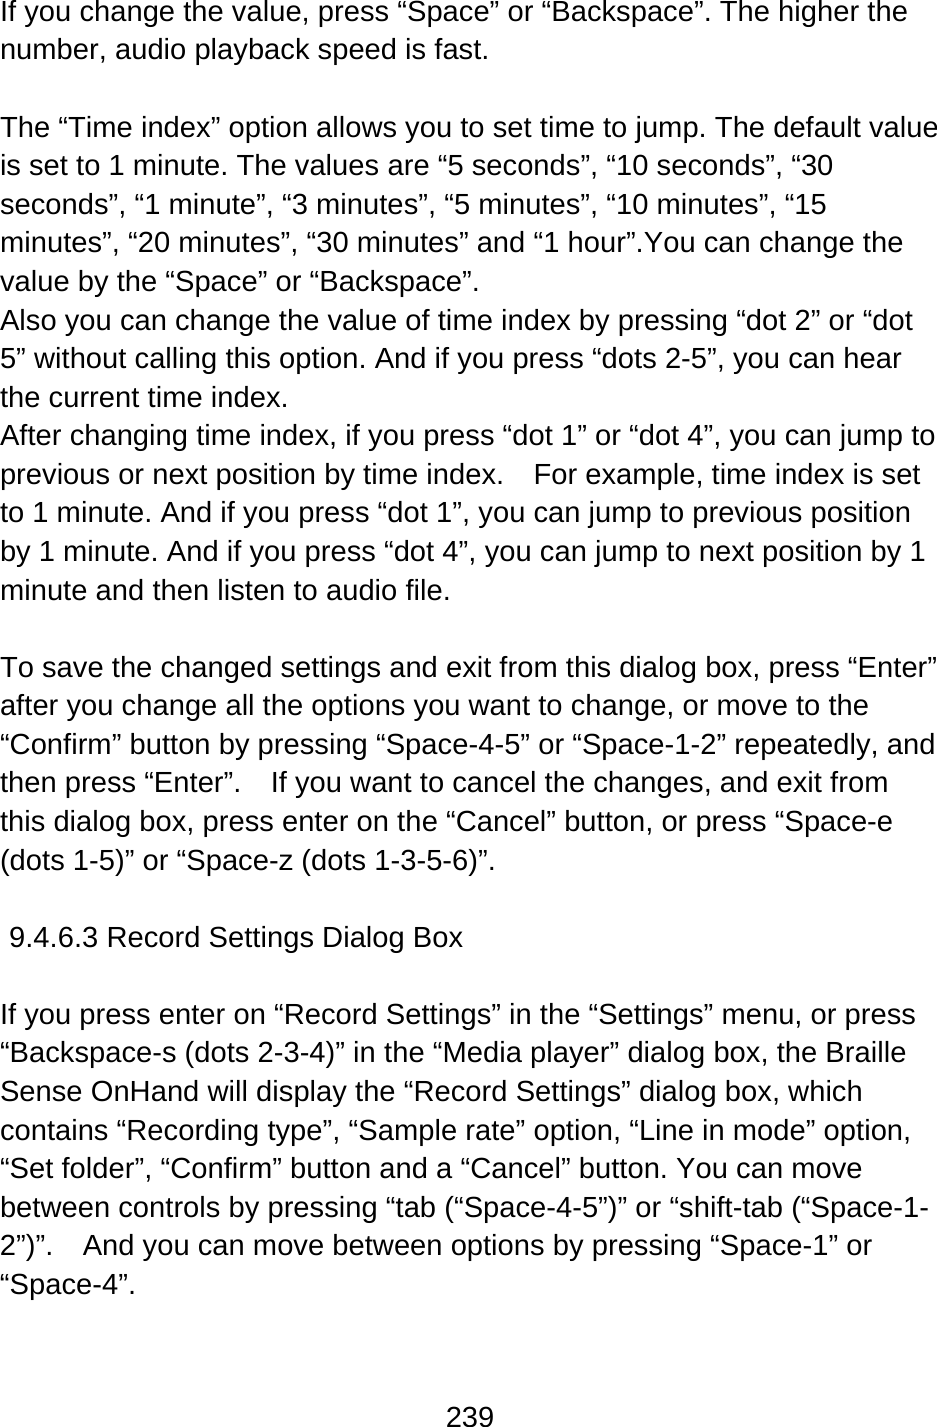 239  If you change the value, press “Space” or “Backspace”. The higher the number, audio playback speed is fast.  The “Time index” option allows you to set time to jump. The default value is set to 1 minute. The values are “5 seconds”, “10 seconds”, “30 seconds”, “1 minute”, “3 minutes”, “5 minutes”, “10 minutes”, “15 minutes”, “20 minutes”, “30 minutes” and “1 hour”.You can change the value by the “Space” or “Backspace”.   Also you can change the value of time index by pressing “dot 2” or “dot 5” without calling this option. And if you press “dots 2-5”, you can hear the current time index. After changing time index, if you press “dot 1” or “dot 4”, you can jump to previous or next position by time index.    For example, time index is set to 1 minute. And if you press “dot 1”, you can jump to previous position by 1 minute. And if you press “dot 4”, you can jump to next position by 1 minute and then listen to audio file.  To save the changed settings and exit from this dialog box, press “Enter” after you change all the options you want to change, or move to the “Confirm” button by pressing “Space-4-5” or “Space-1-2” repeatedly, and then press “Enter”.    If you want to cancel the changes, and exit from this dialog box, press enter on the “Cancel” button, or press “Space-e (dots 1-5)” or “Space-z (dots 1-3-5-6)”.  9.4.6.3 Record Settings Dialog Box  If you press enter on “Record Settings” in the “Settings” menu, or press “Backspace-s (dots 2-3-4)” in the “Media player” dialog box, the Braille Sense OnHand will display the “Record Settings” dialog box, which contains “Recording type”, “Sample rate” option, “Line in mode” option, “Set folder”, “Confirm” button and a “Cancel” button. You can move between controls by pressing “tab (“Space-4-5”)” or “shift-tab (“Space-1-2”)”.    And you can move between options by pressing “Space-1” or “Space-4”.  